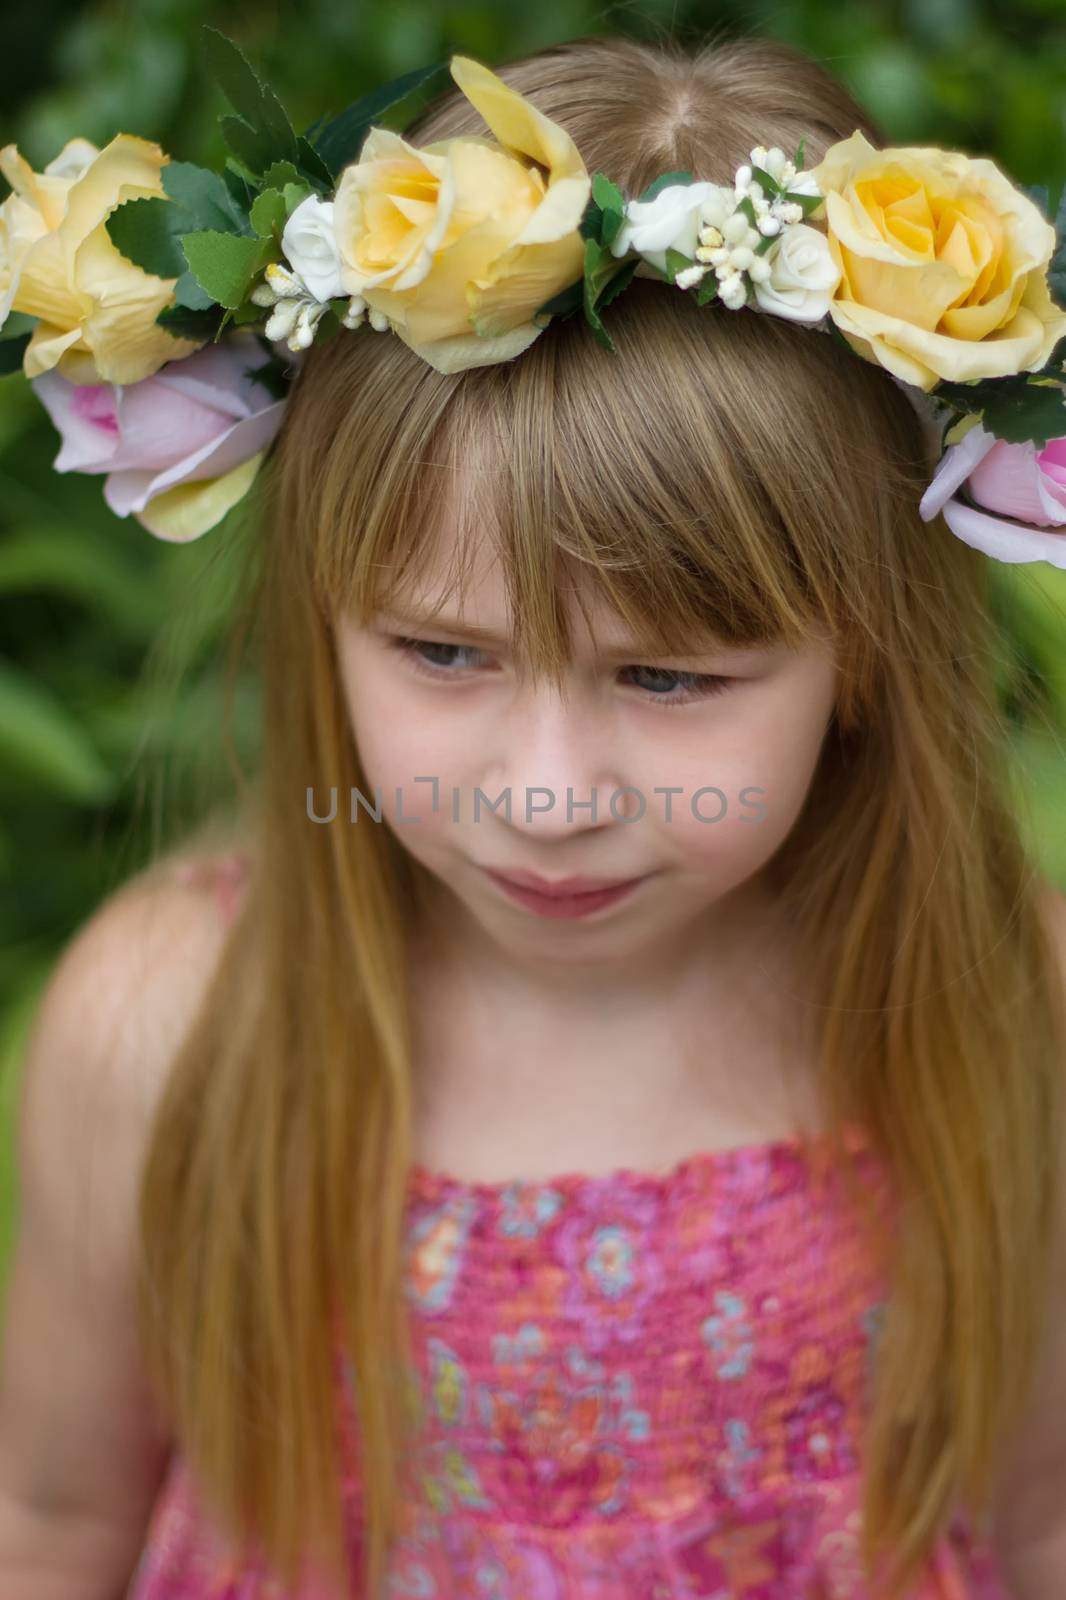 Girl 6 years old with long hair wearing a crown